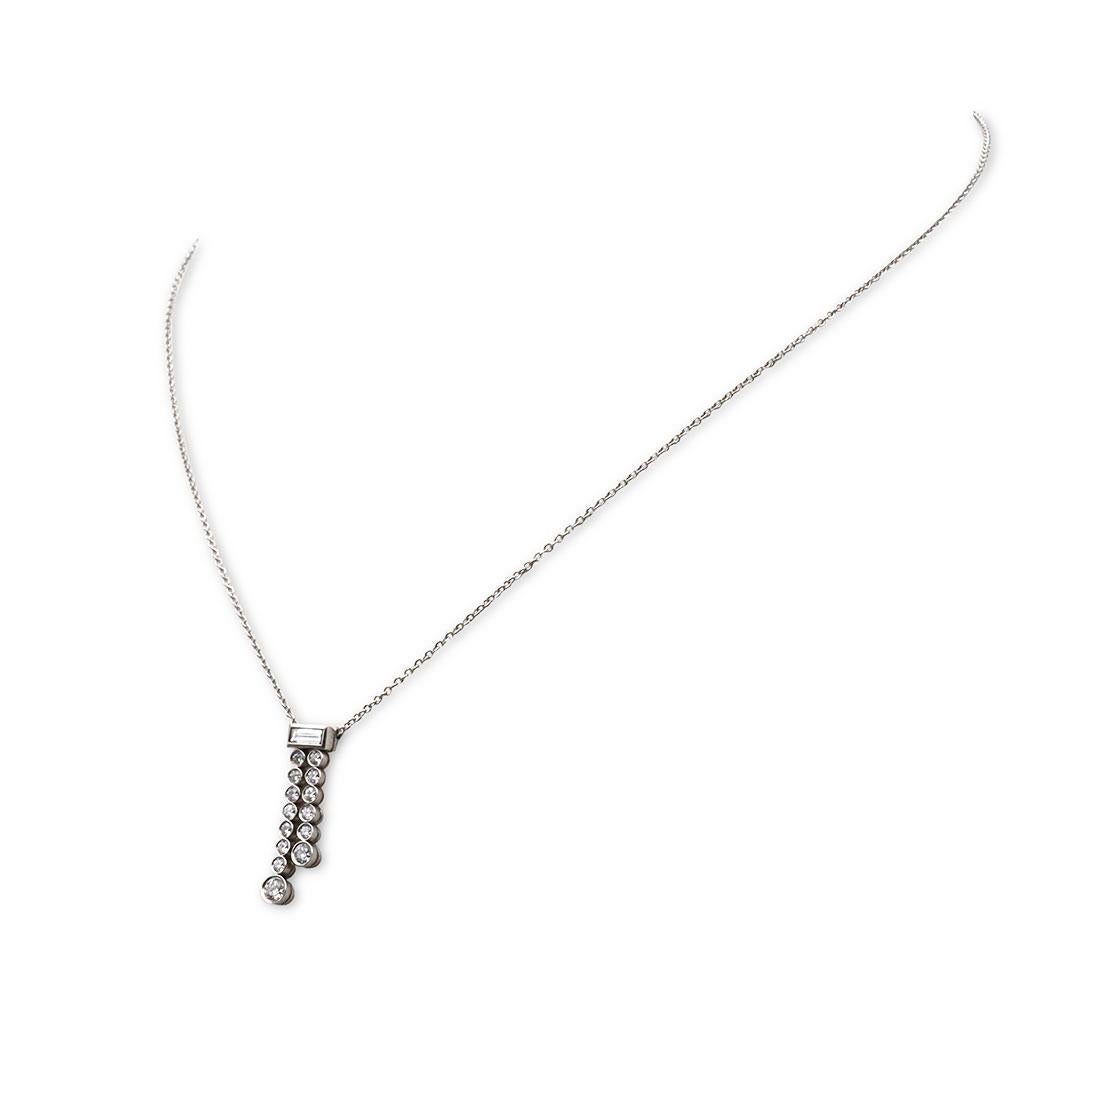 Authentic Tiffany & Co. Jazz necklace crafted in platinum features a diamond drop pendant comprised of two strands of round brilliant cut diamonds hanging from a centered baguette cut diamond. The estimated total carat weight is .50. Signed Tiffany